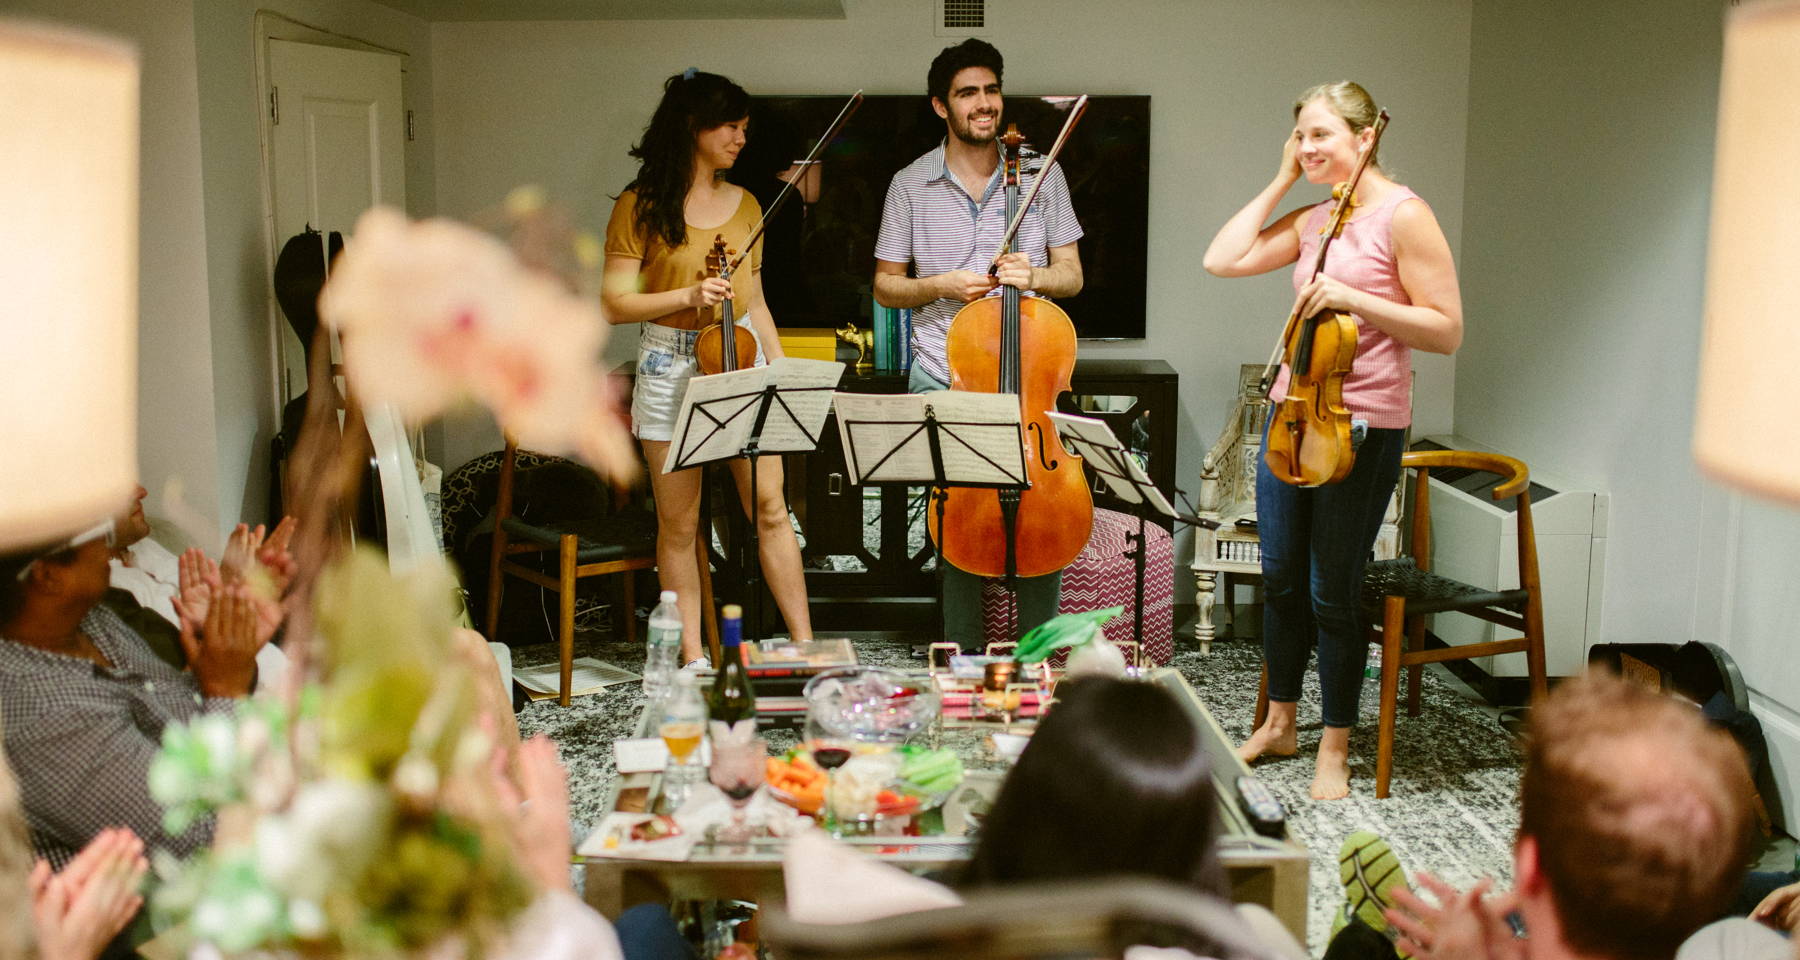 Live classical music in an artists loft